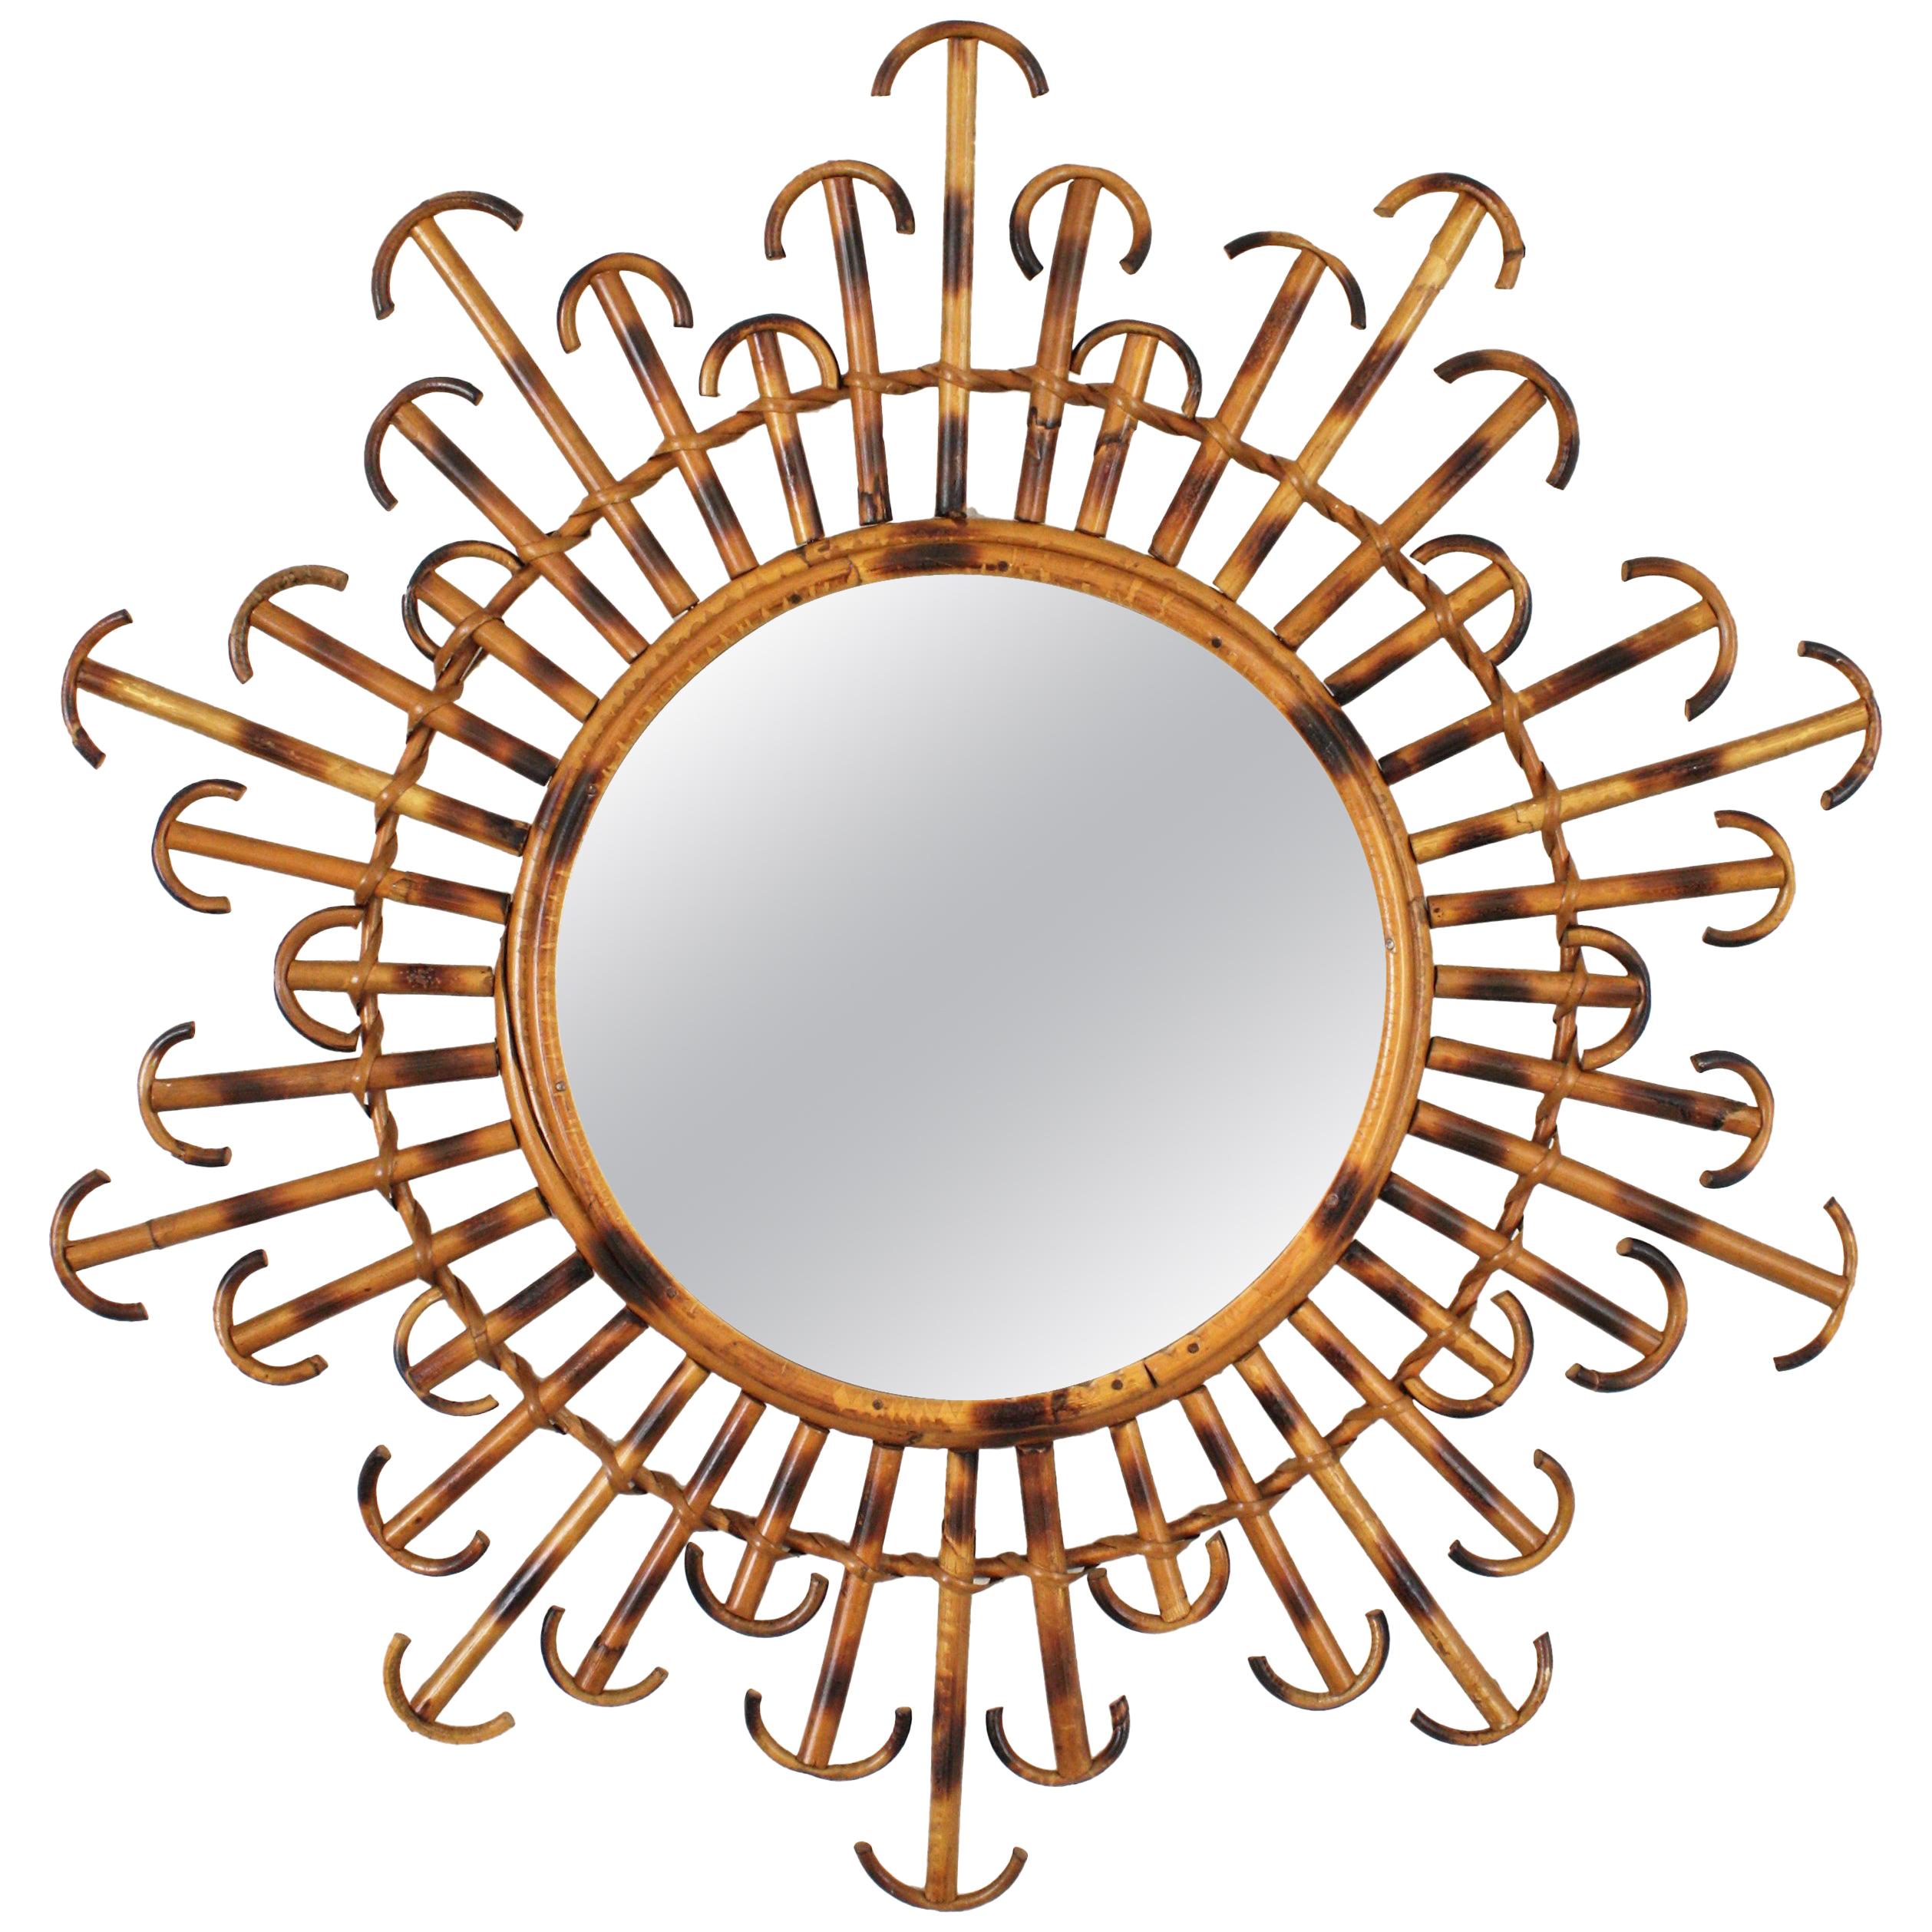 French Rattan Wicker Sunburst Mirror with Curved Endings, 1950s